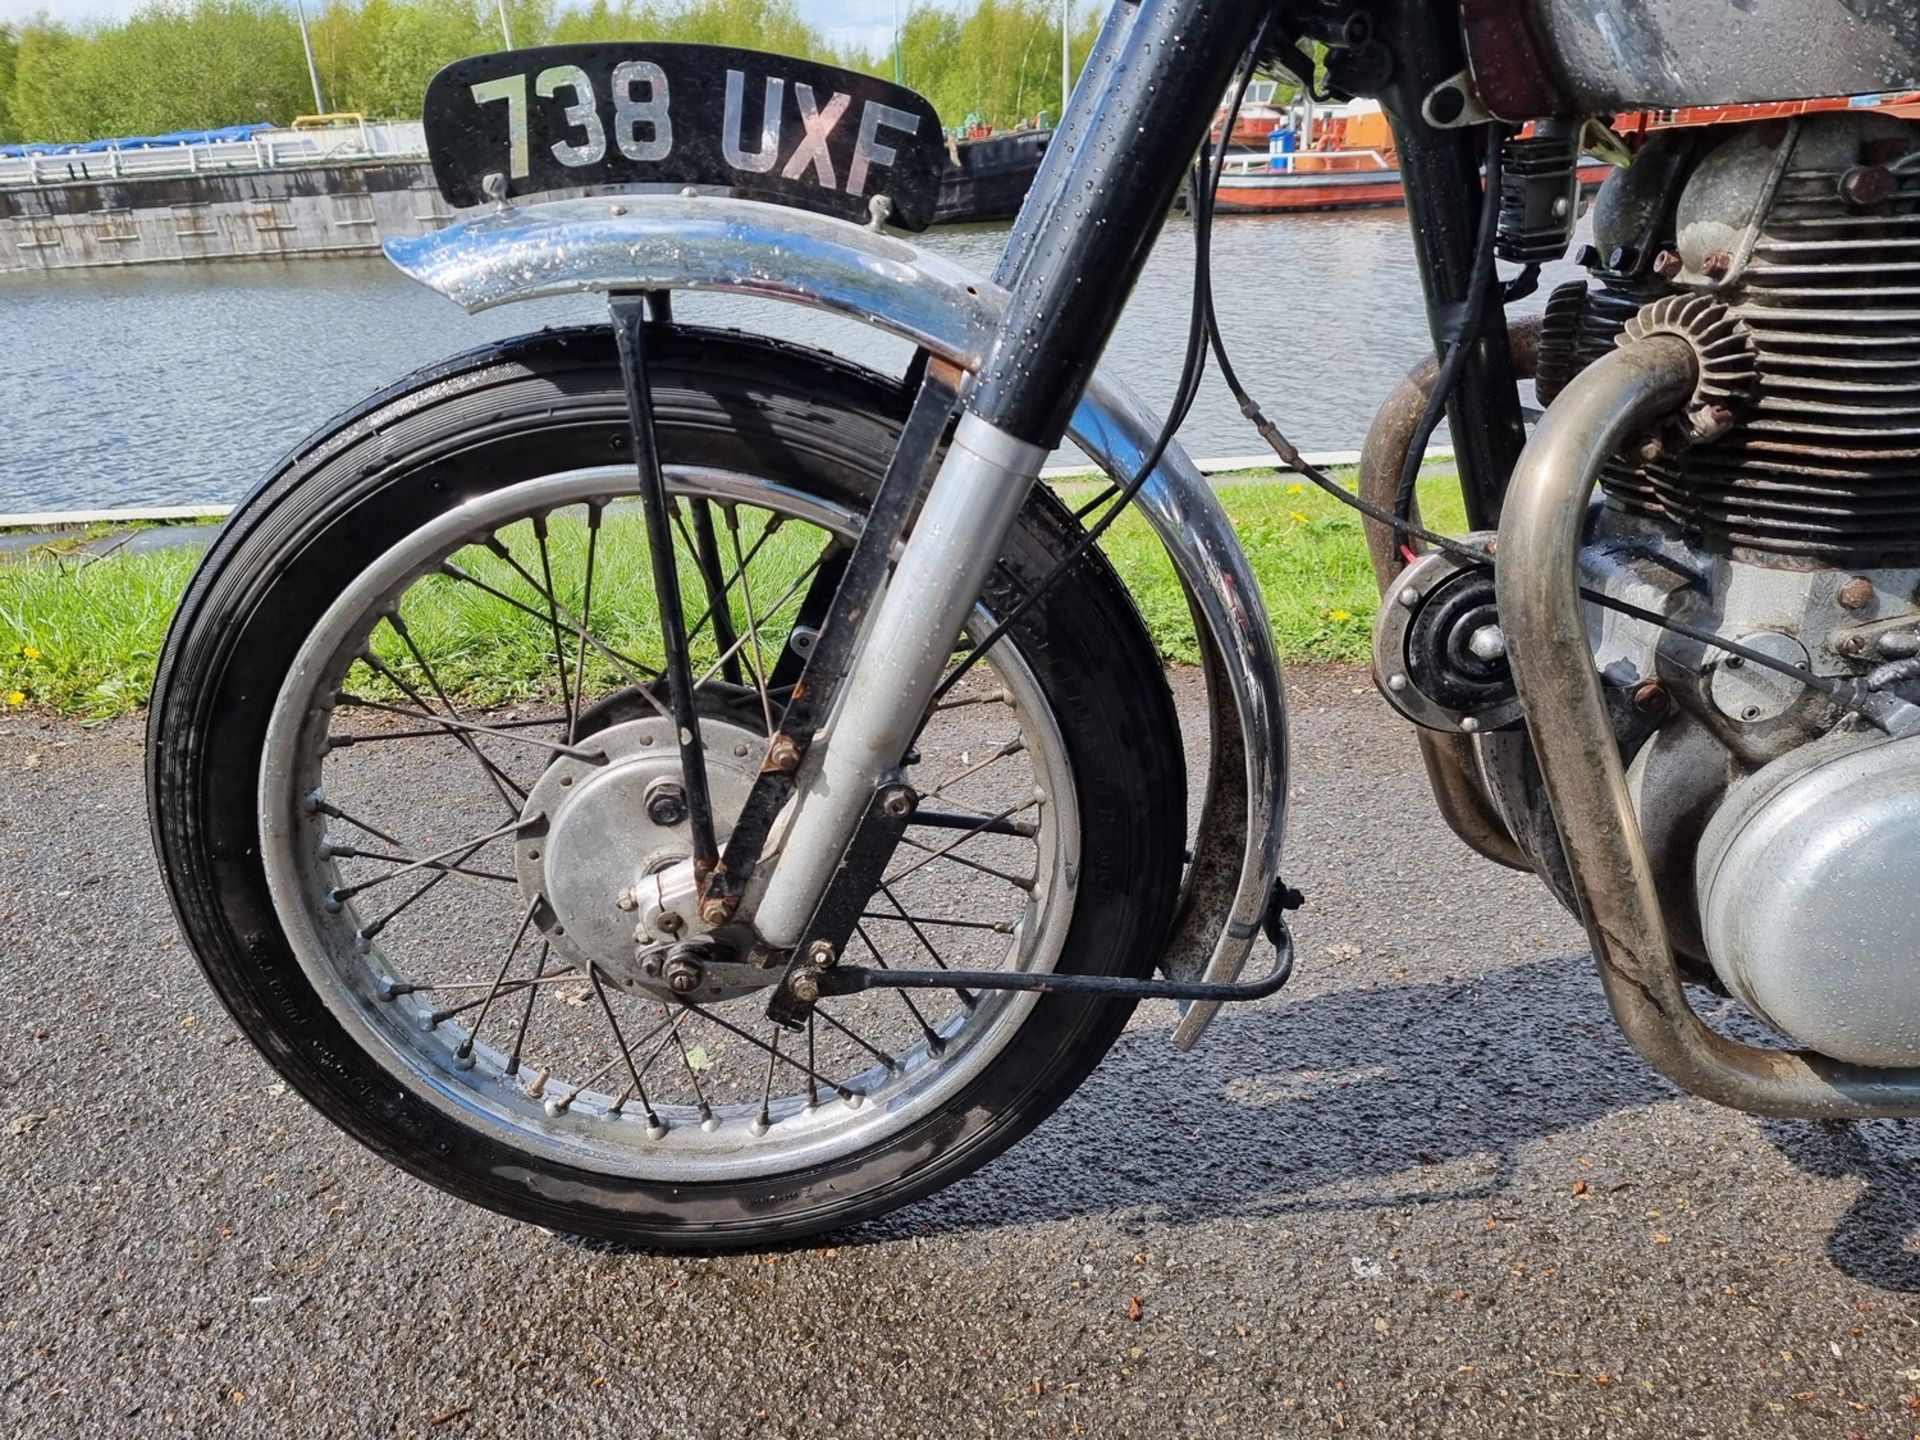 1958 Royal Enfield Constellation, 693 cc. Registration number 738 UXF (non transferrable). Frame - Image 10 of 16